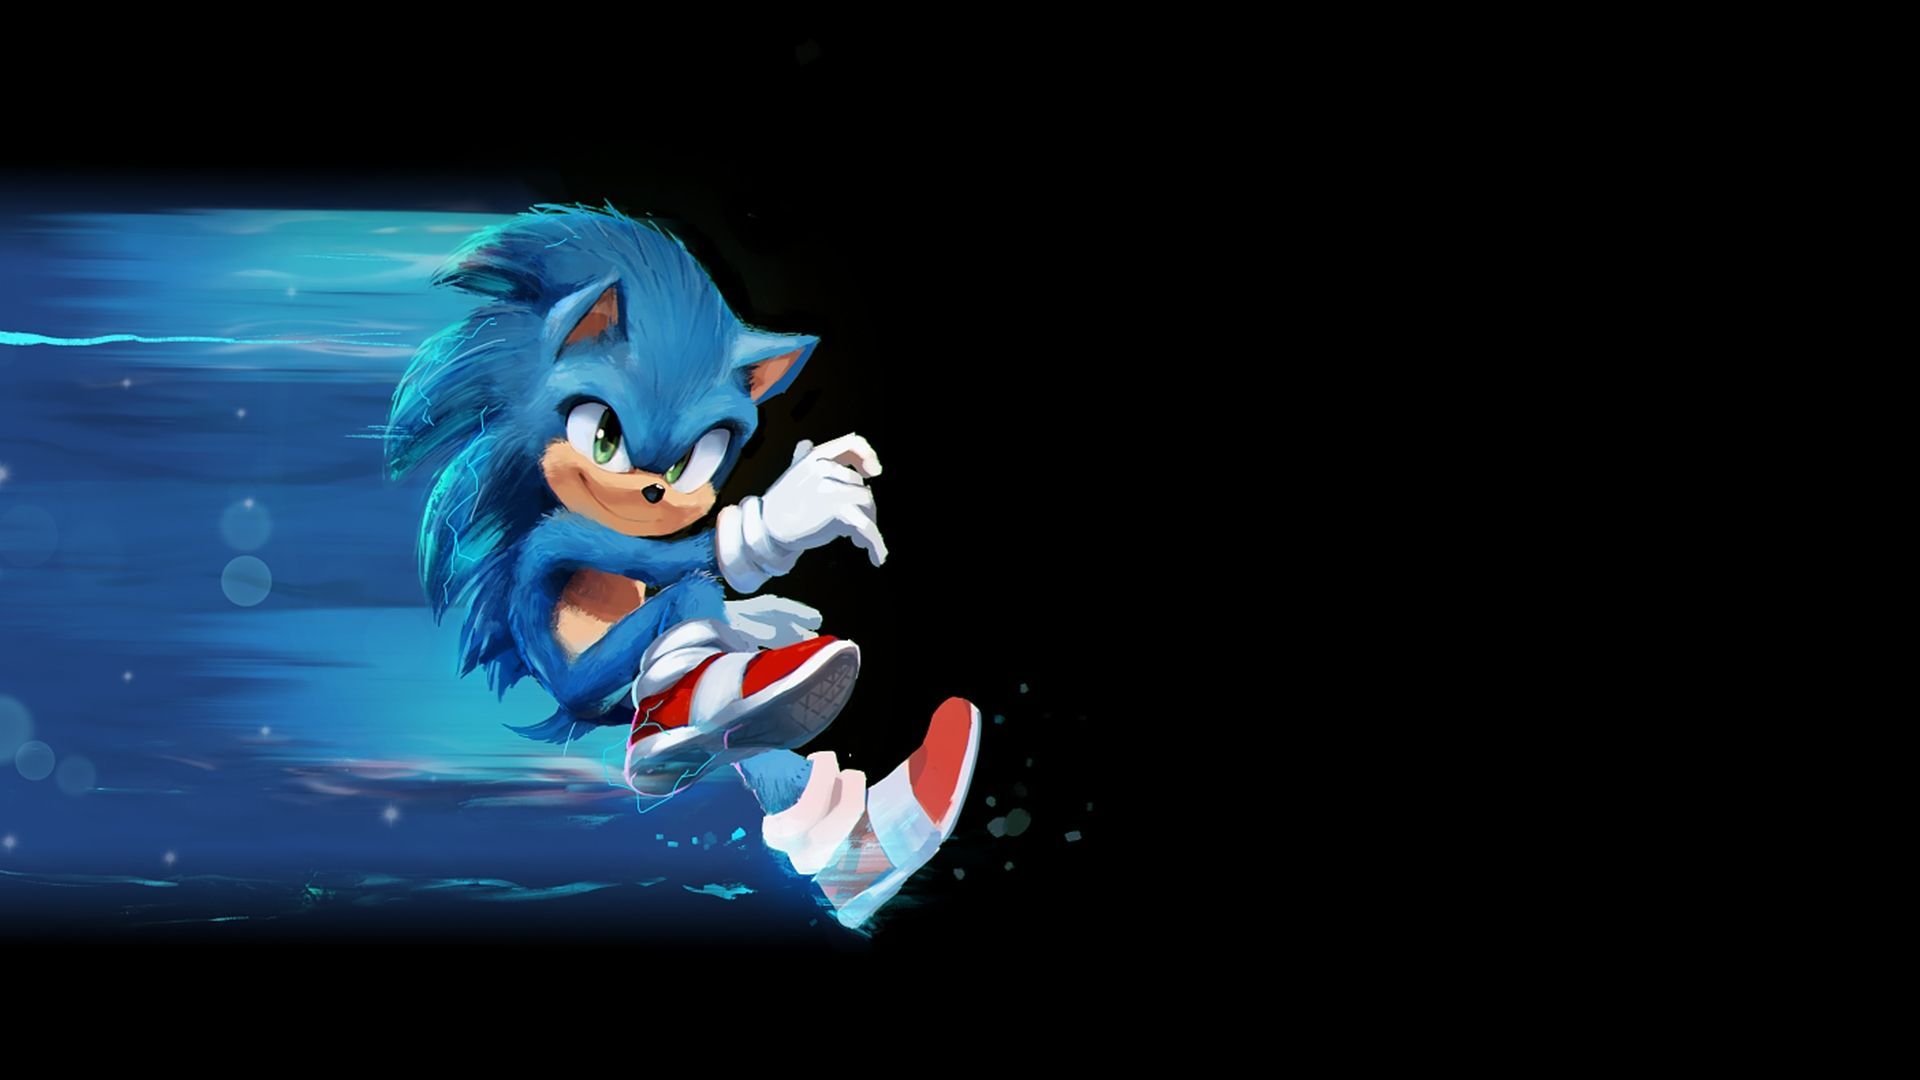 Sonic The Hedgehog Artwork Wallpaper HD Movies 4k with The Awesome Wallpaper of Sonic em 2020